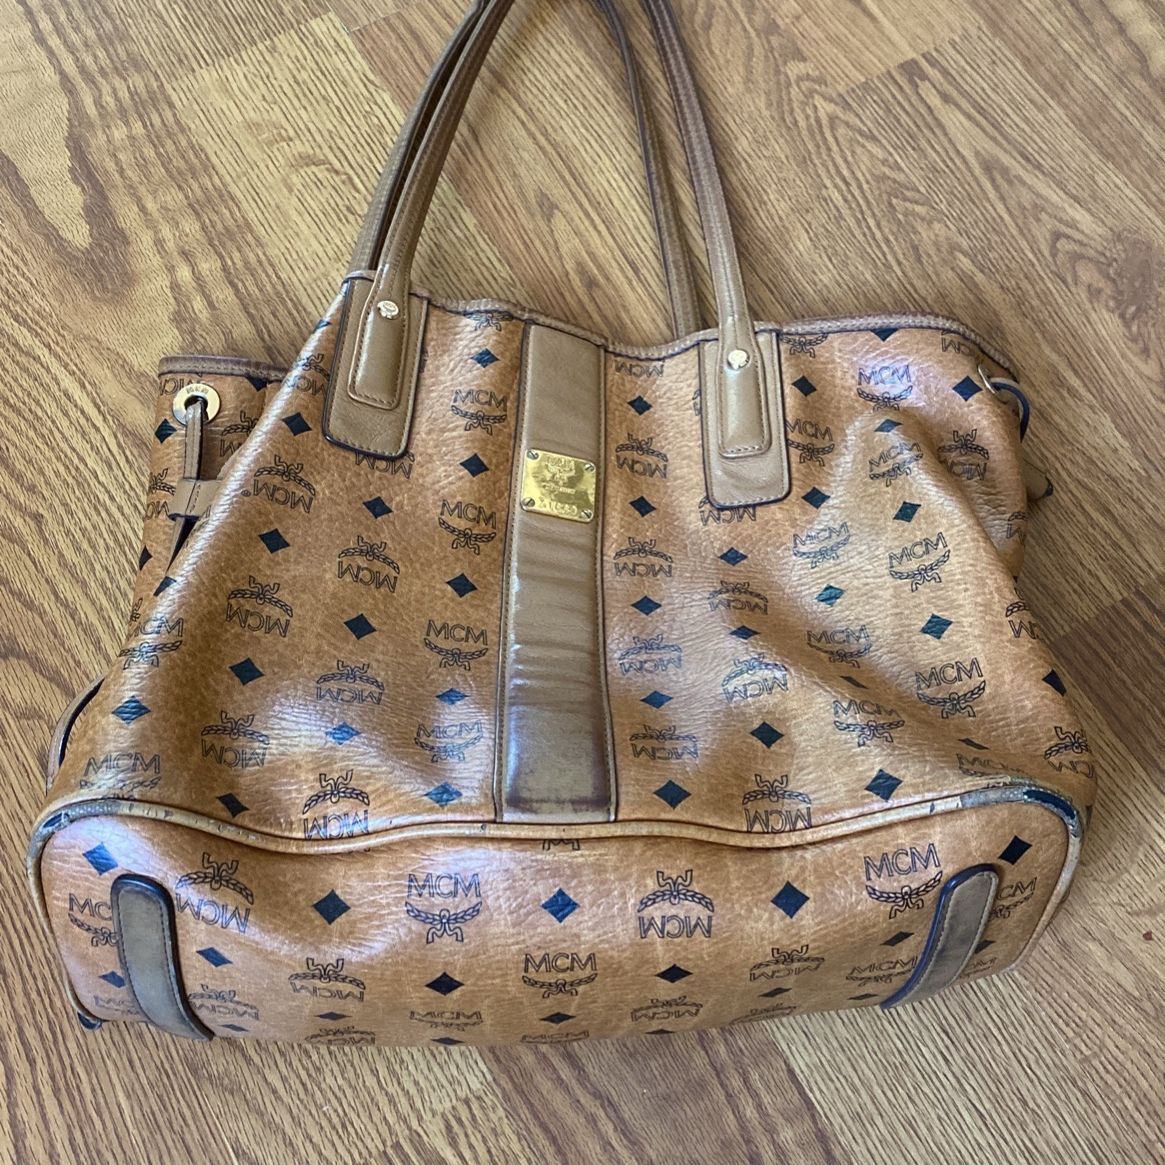 MCM AREN Shopper Tote Bag for Sale in Brooklyn, NY - OfferUp